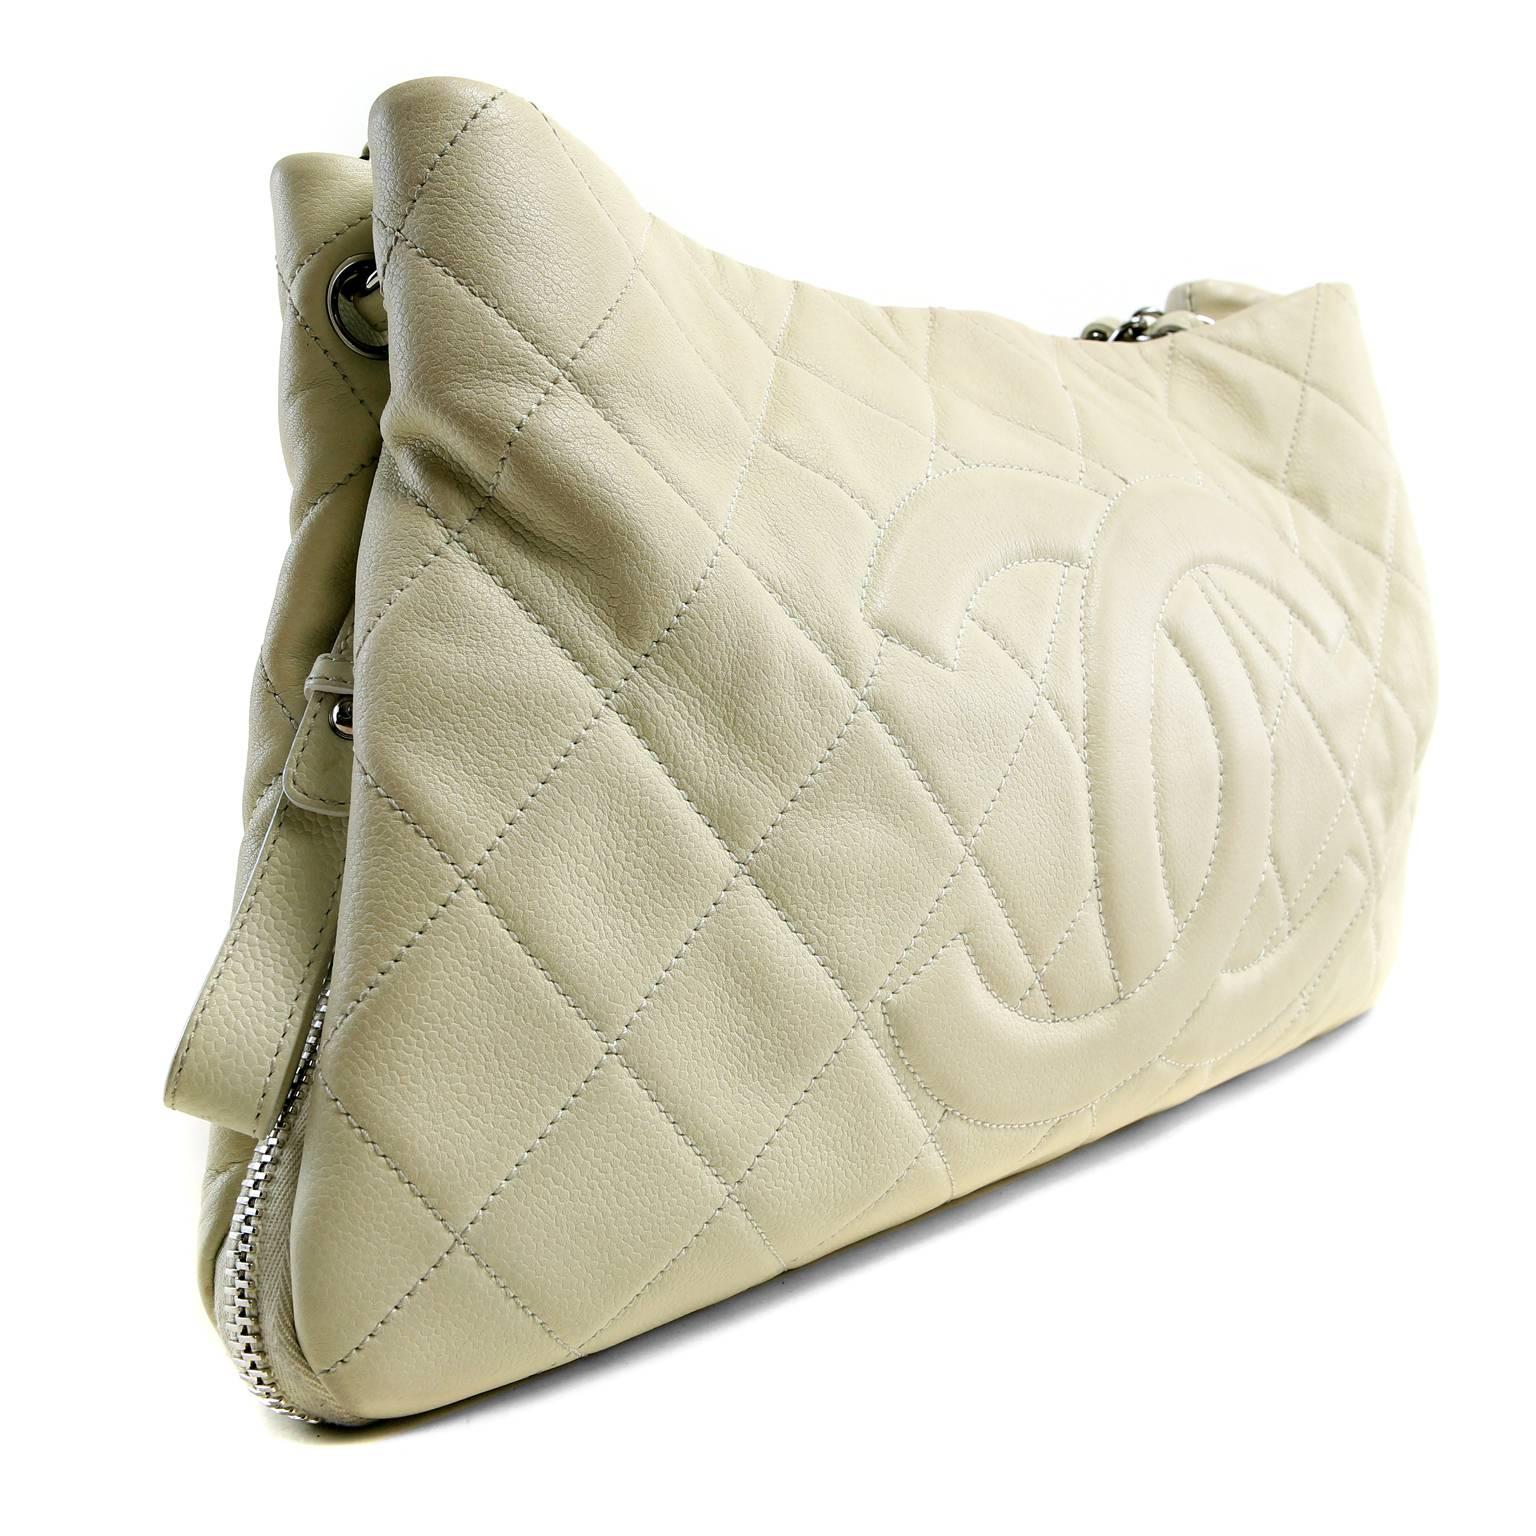 Chanel Ivory Caviar Zip Around Expandable Tote is in pristine condition.  Beautiful for every day, this bag is designed with an expandable bottom to vary the silhouette and add capacity. 
 
Neutral ivory leather is textured and durable.  Quilted